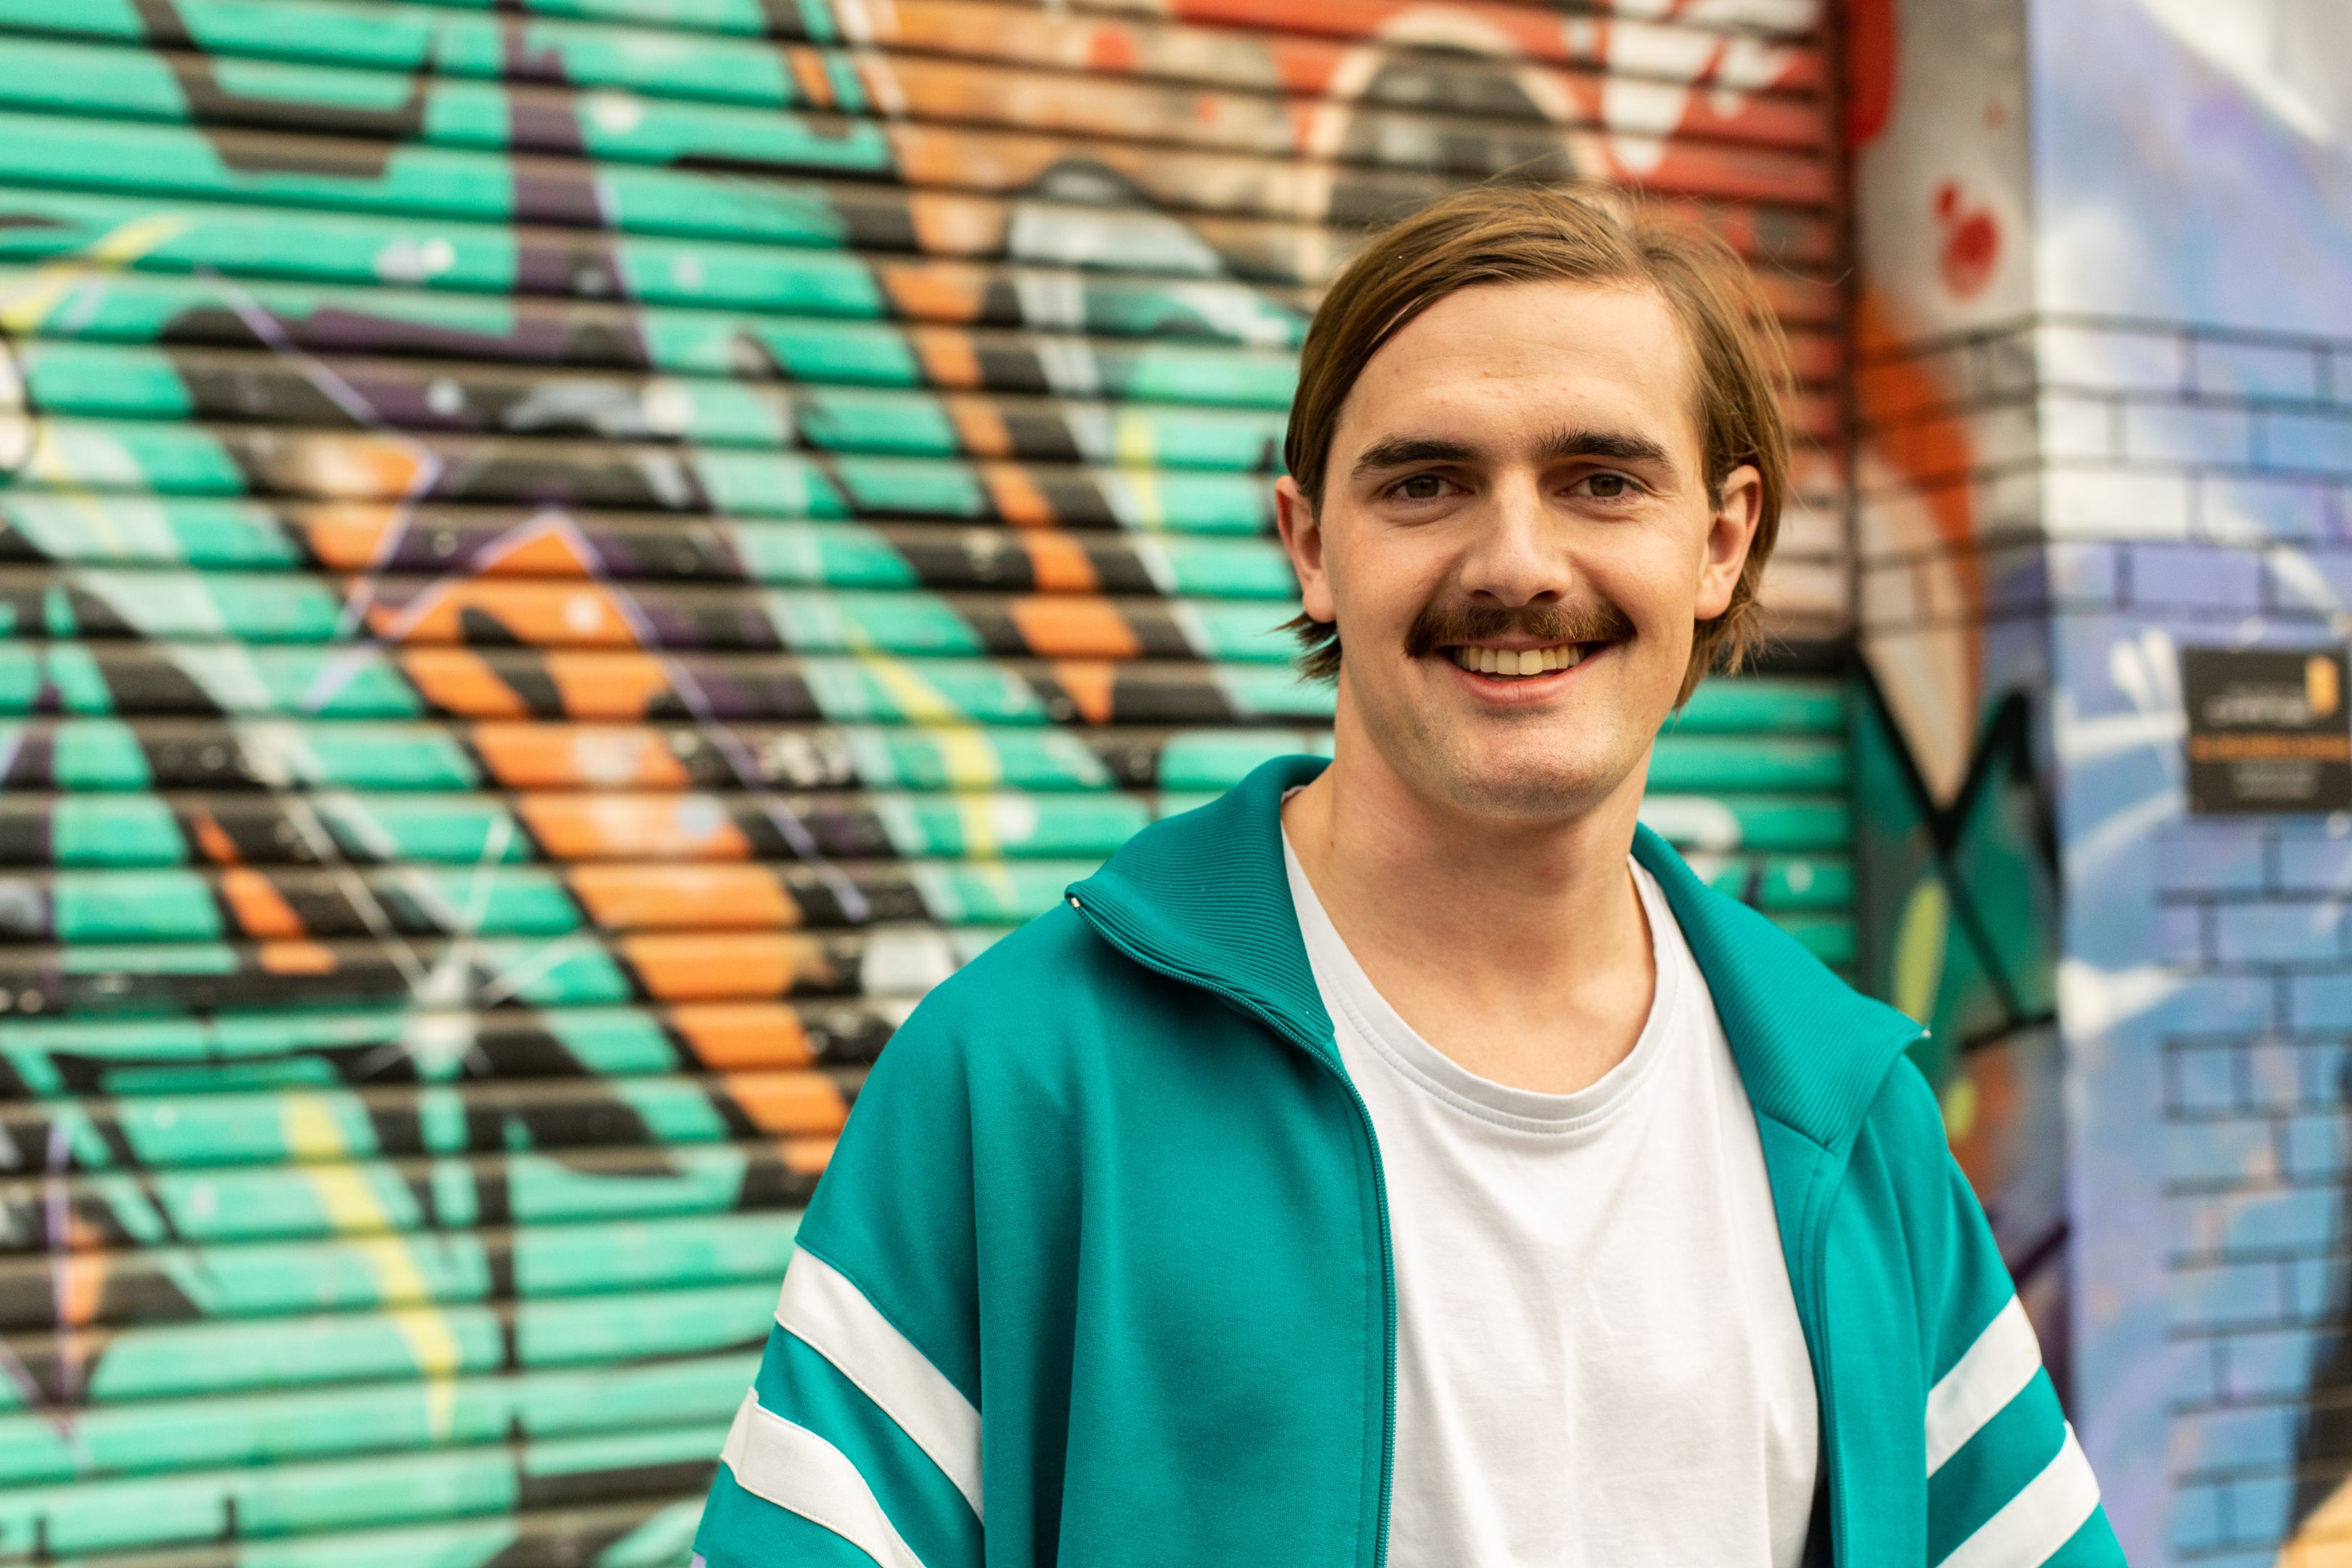 Man with stache standing in front of a graffiti-ed wall, looking pleased with his life choices.